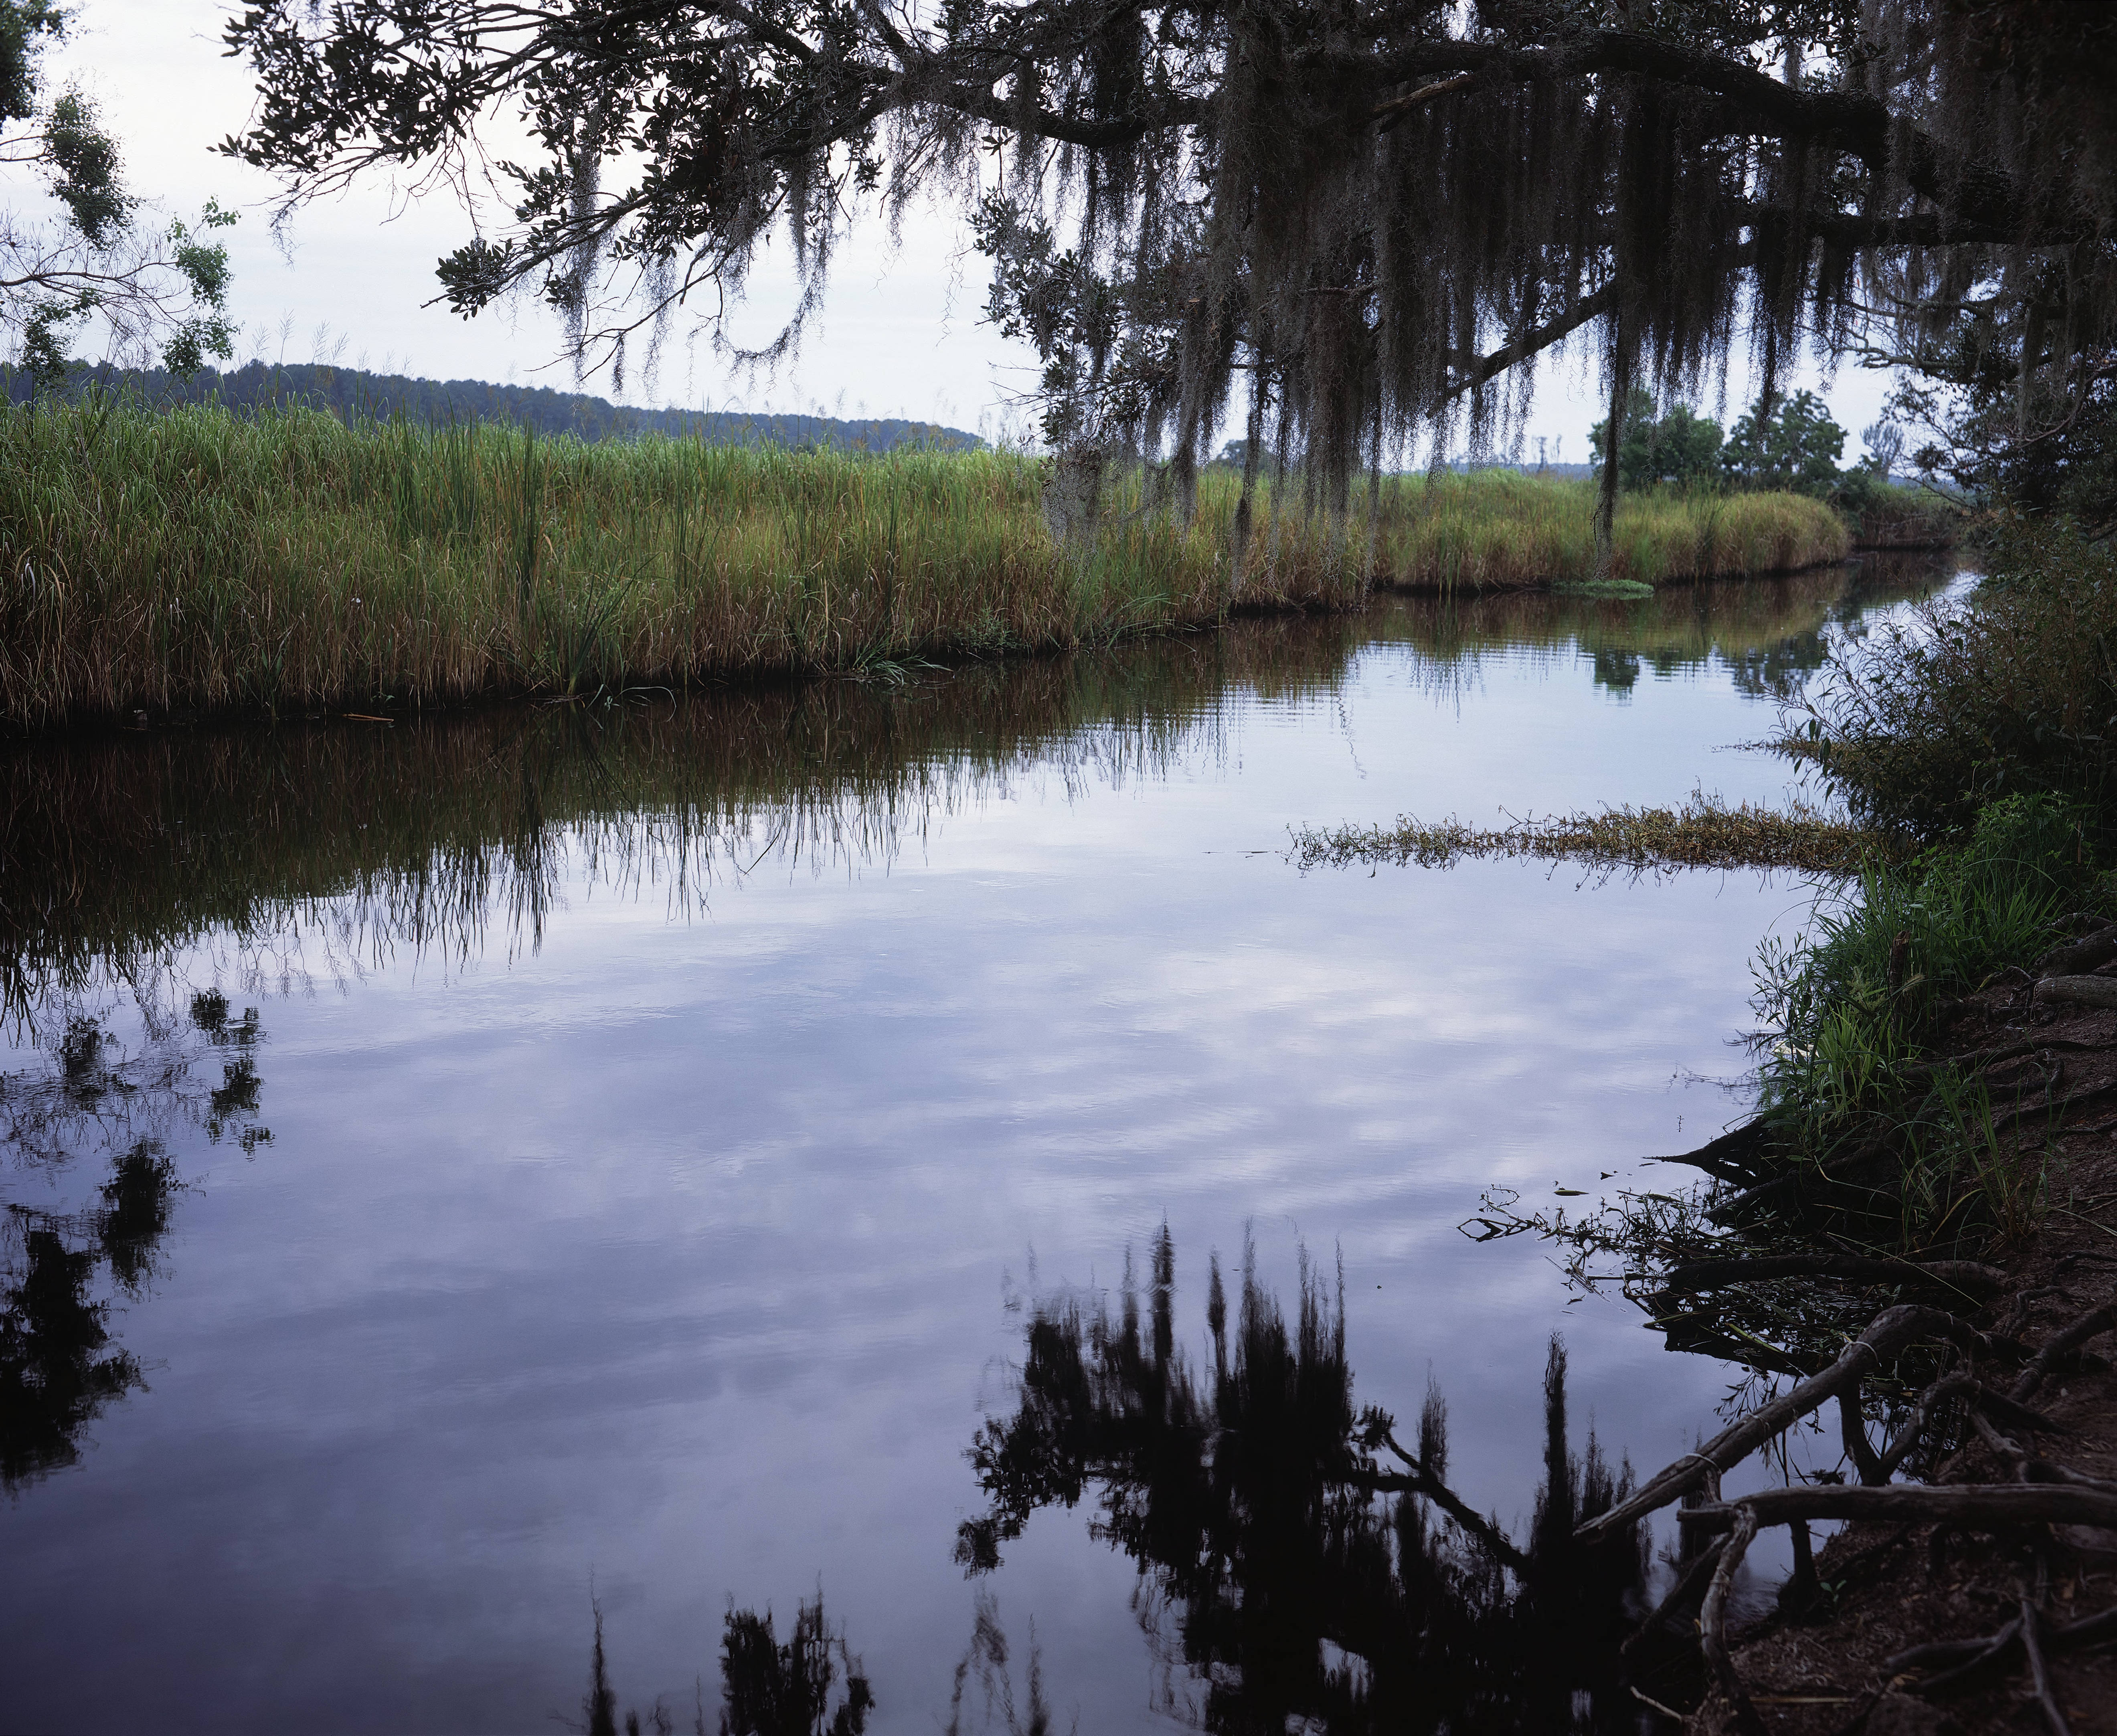 South Carolina coastal creek with marsh in the background and tree branches with Spanish moss hanging over the water